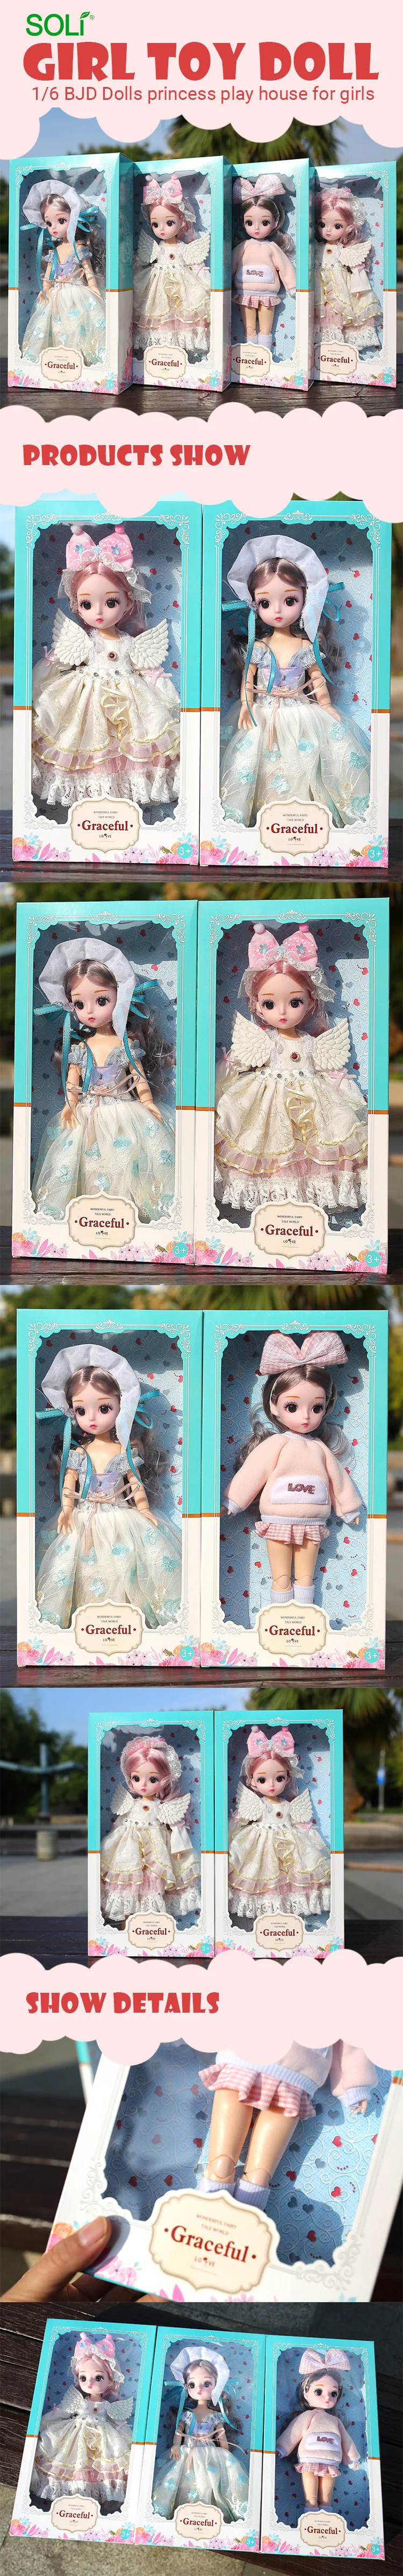 Girl toy doll 1/6 BJD Dolls princess play house for girls 30CM Joints Dolls With Full Outfits